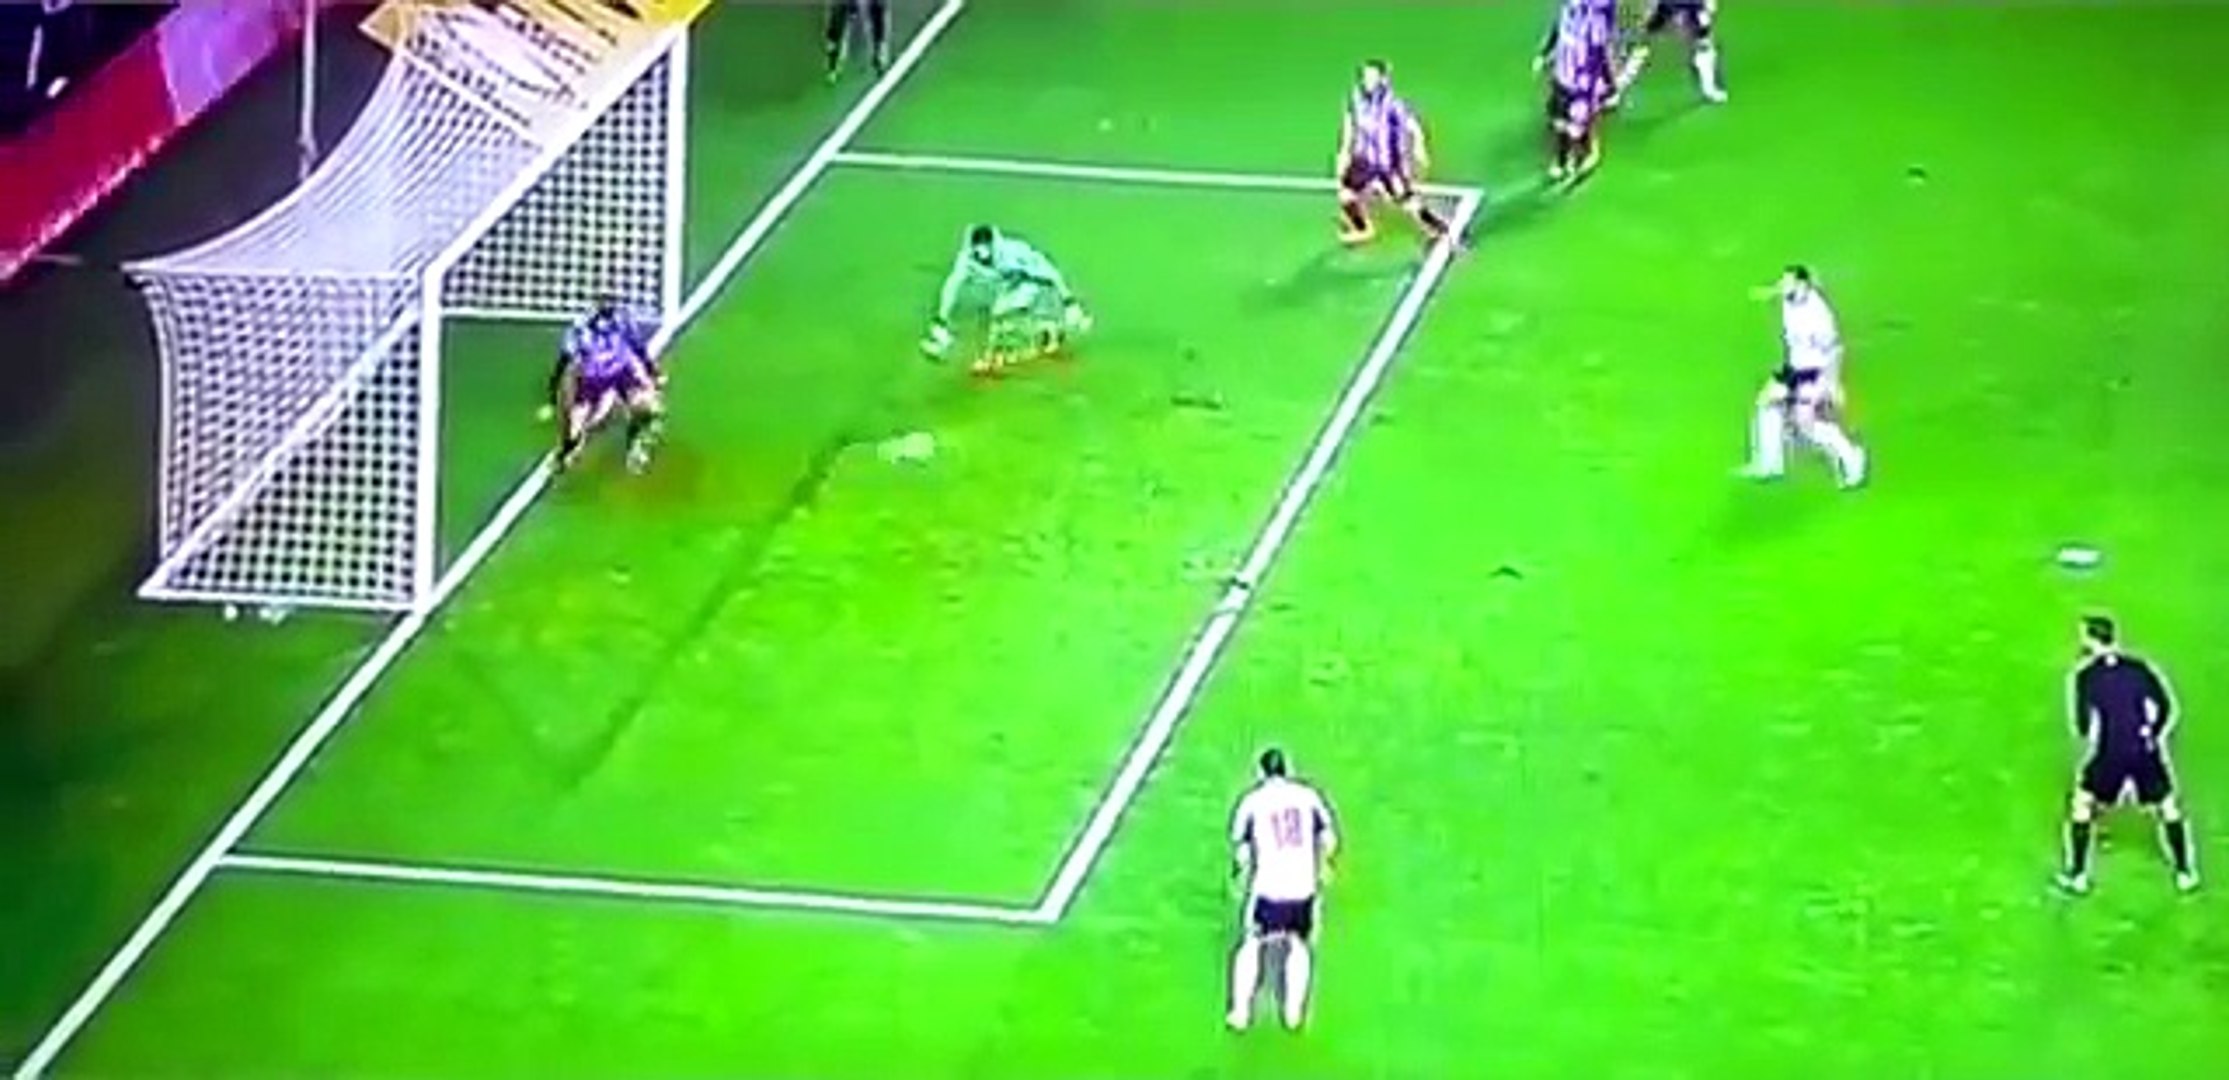 Must See Football (Soccer) Penalty Goals. Funny and Crazy ✪ Top 10